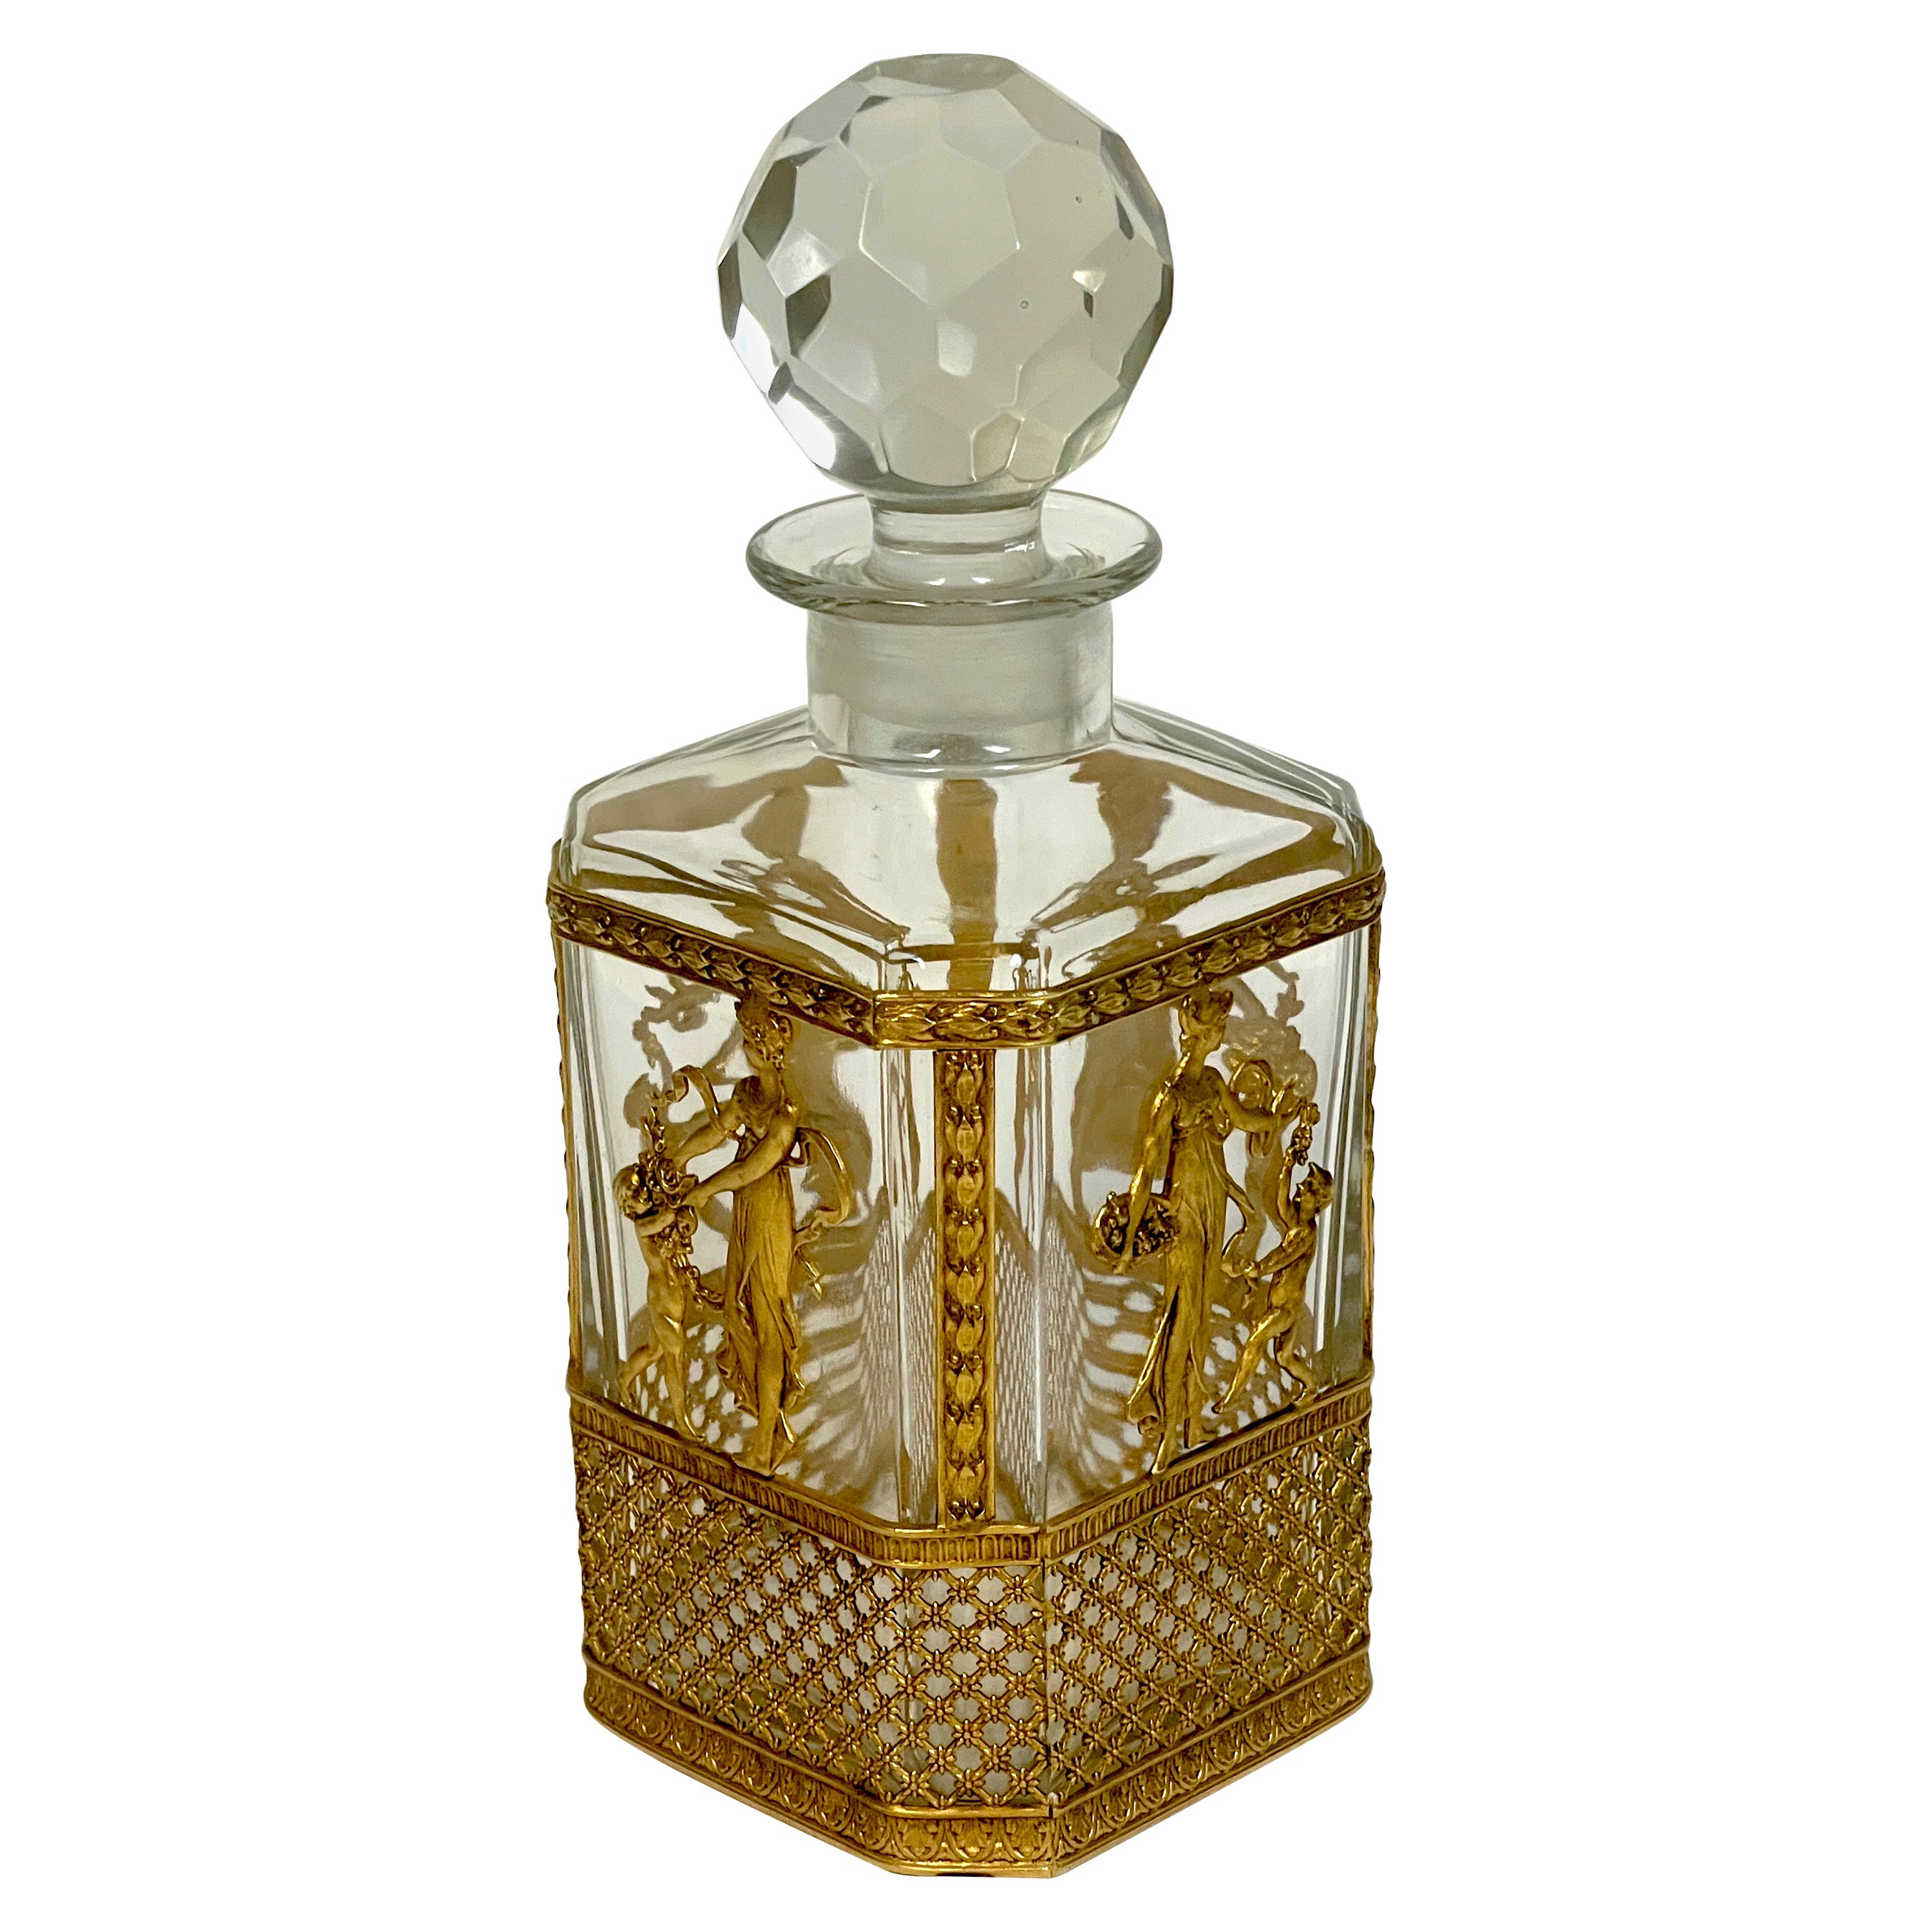 Empire Baccarat Style Ormolu Mounted Decanter For Sale